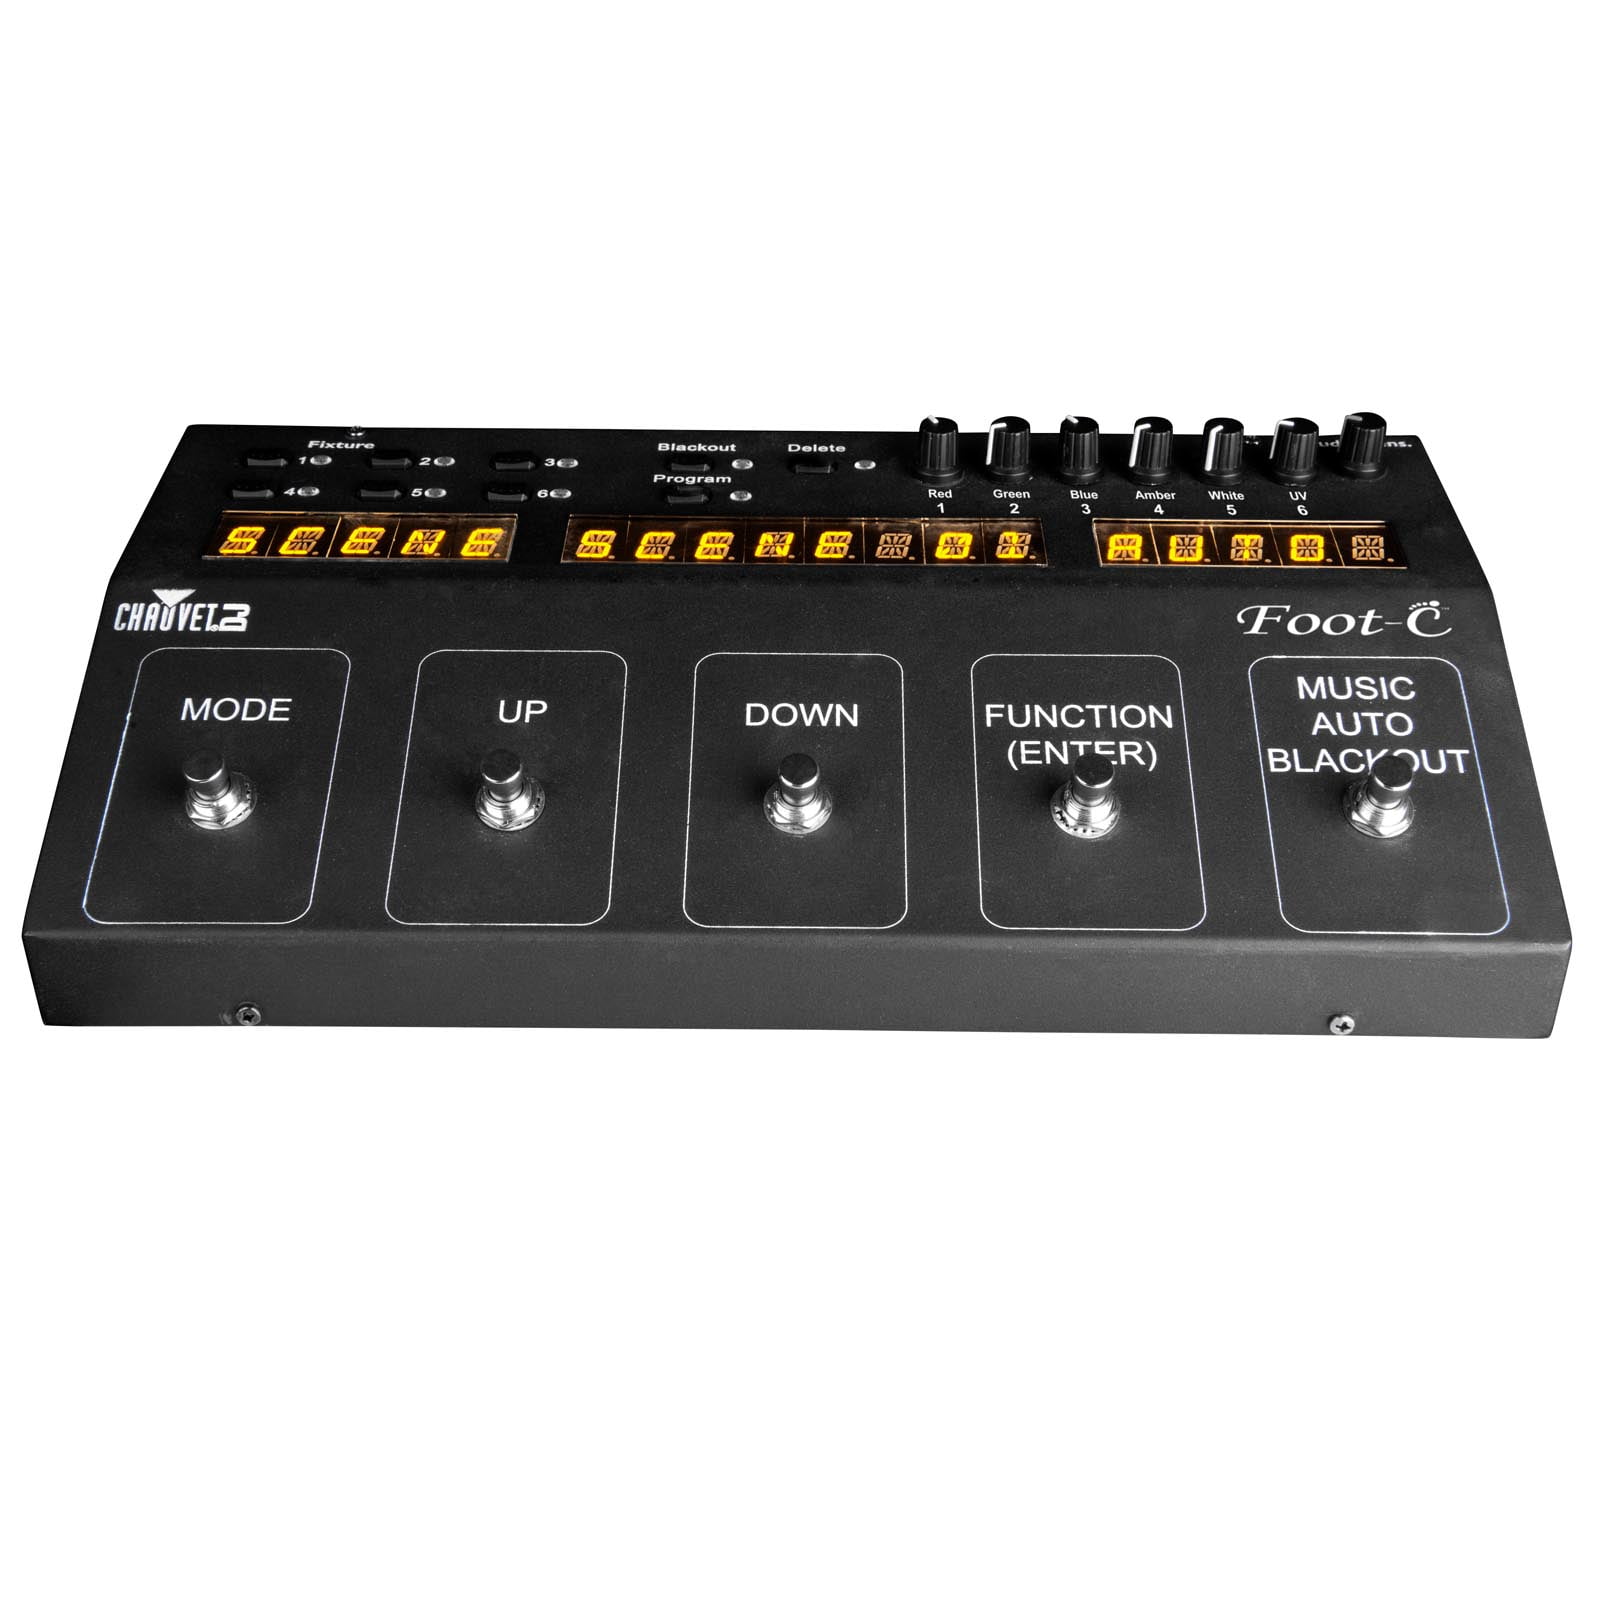 American Lighting DMX-SIMPLE-6 Simple DMX Controller with 6 Channel 